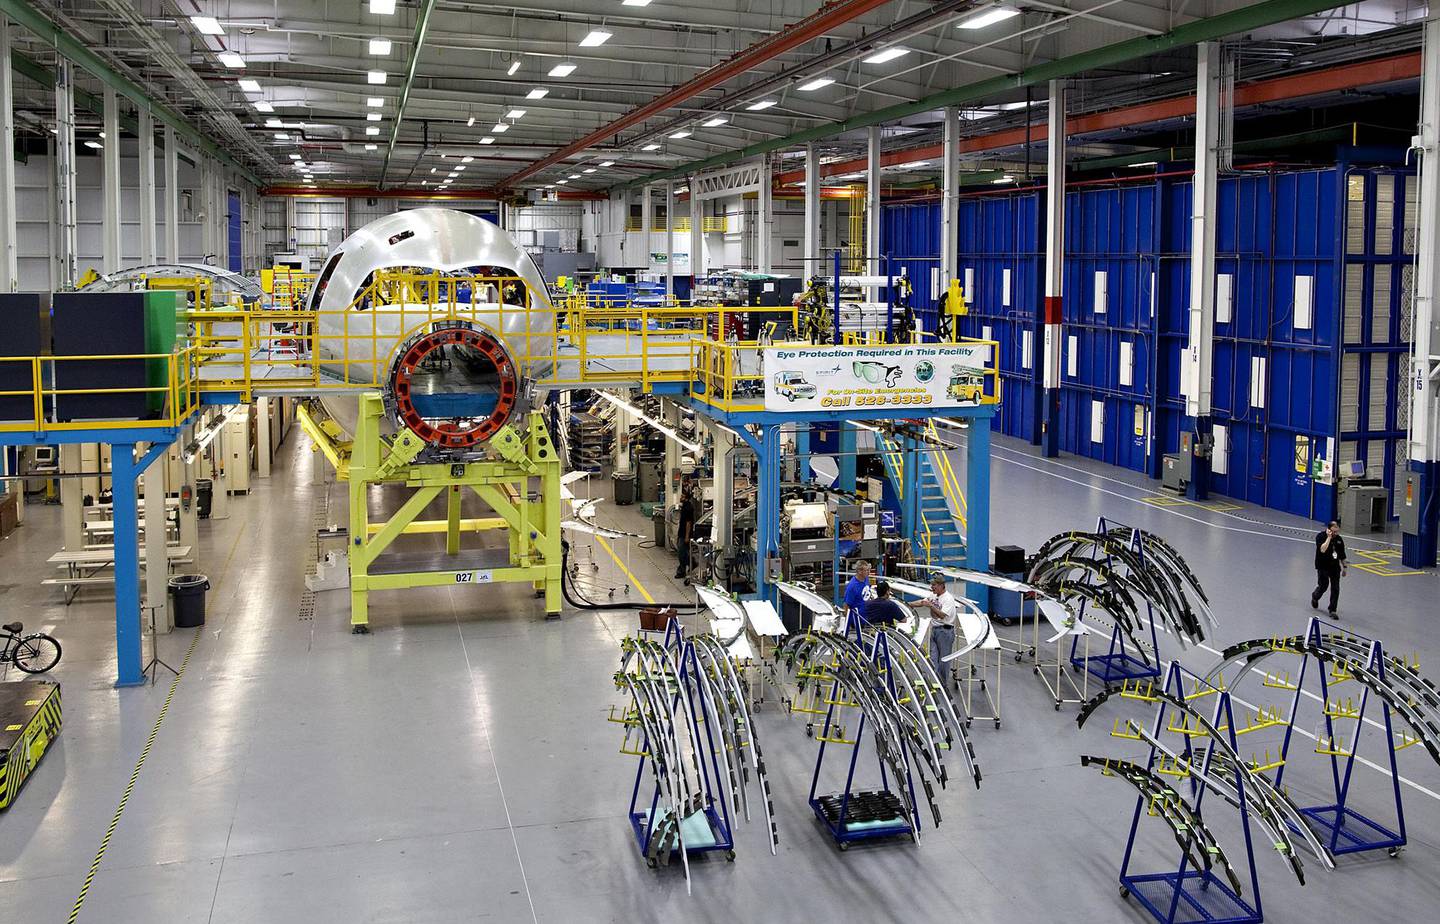 A Boeing 787 composite forward fuselage section sits on the factory floor at Spirit AeroSystems in Wichita, Kansas.